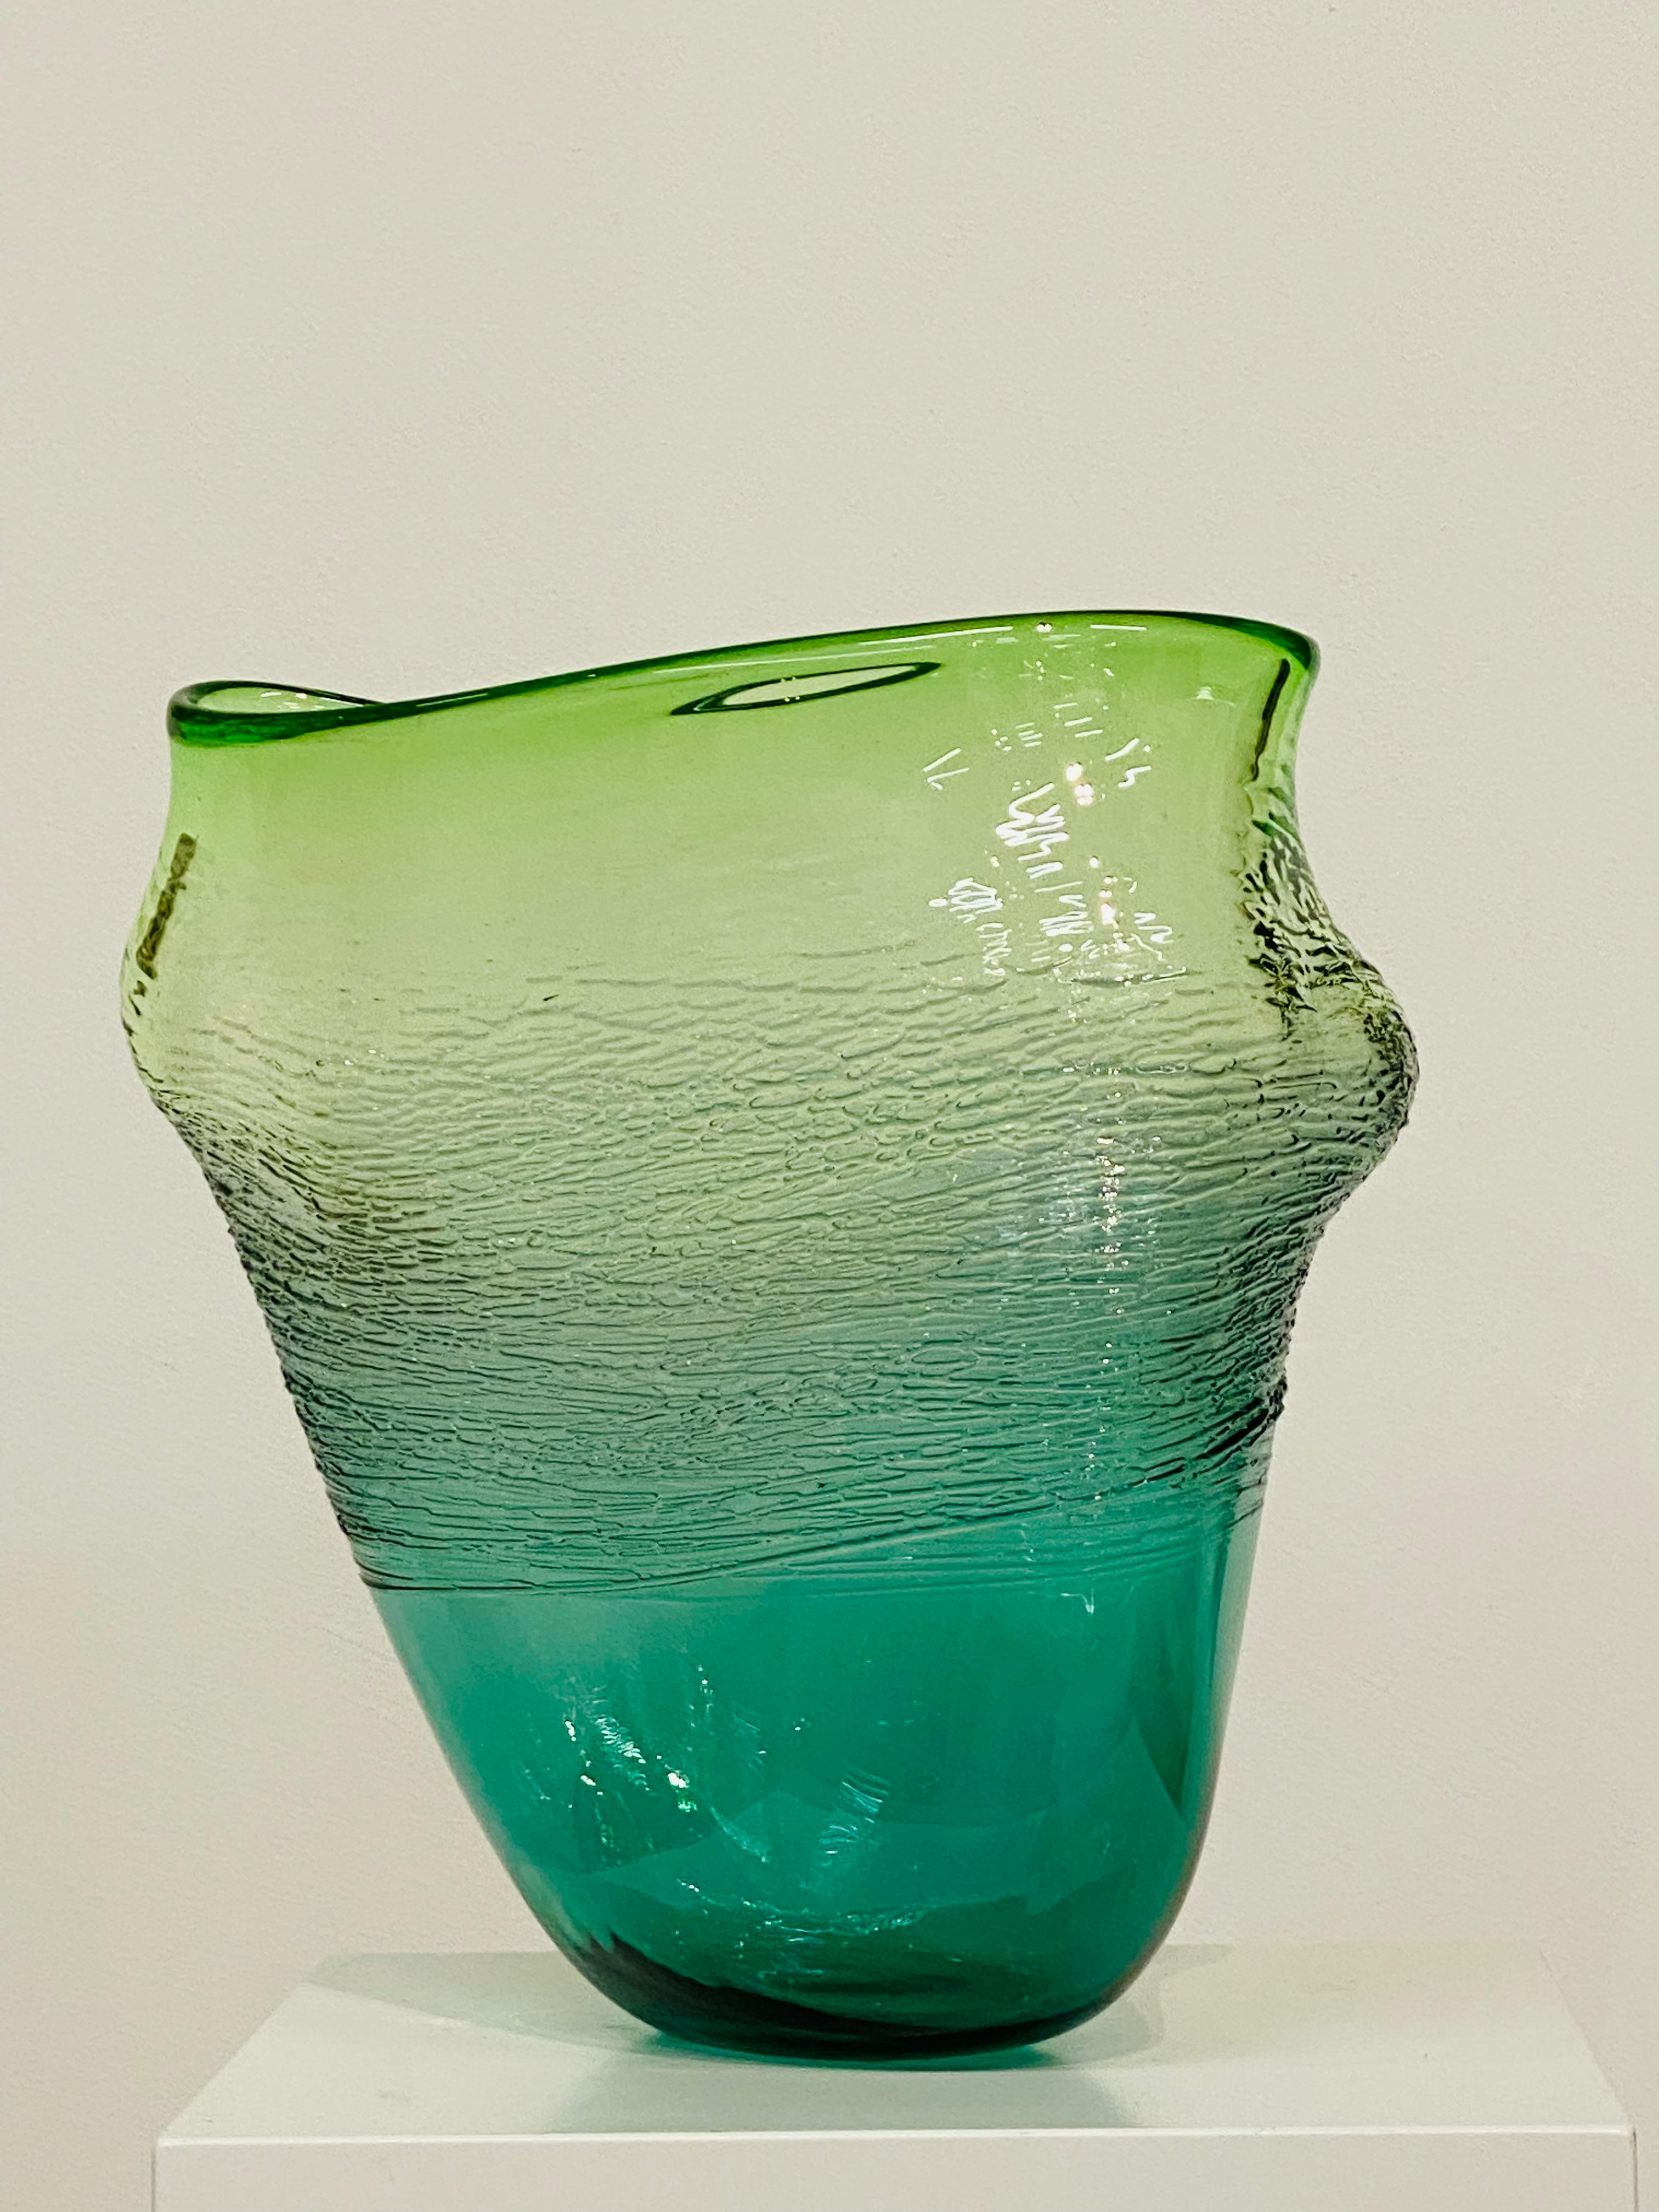 Fluid Form, Green-21st Century Blown Glass Object  - Gray Abstract Sculpture by Bibi Smit